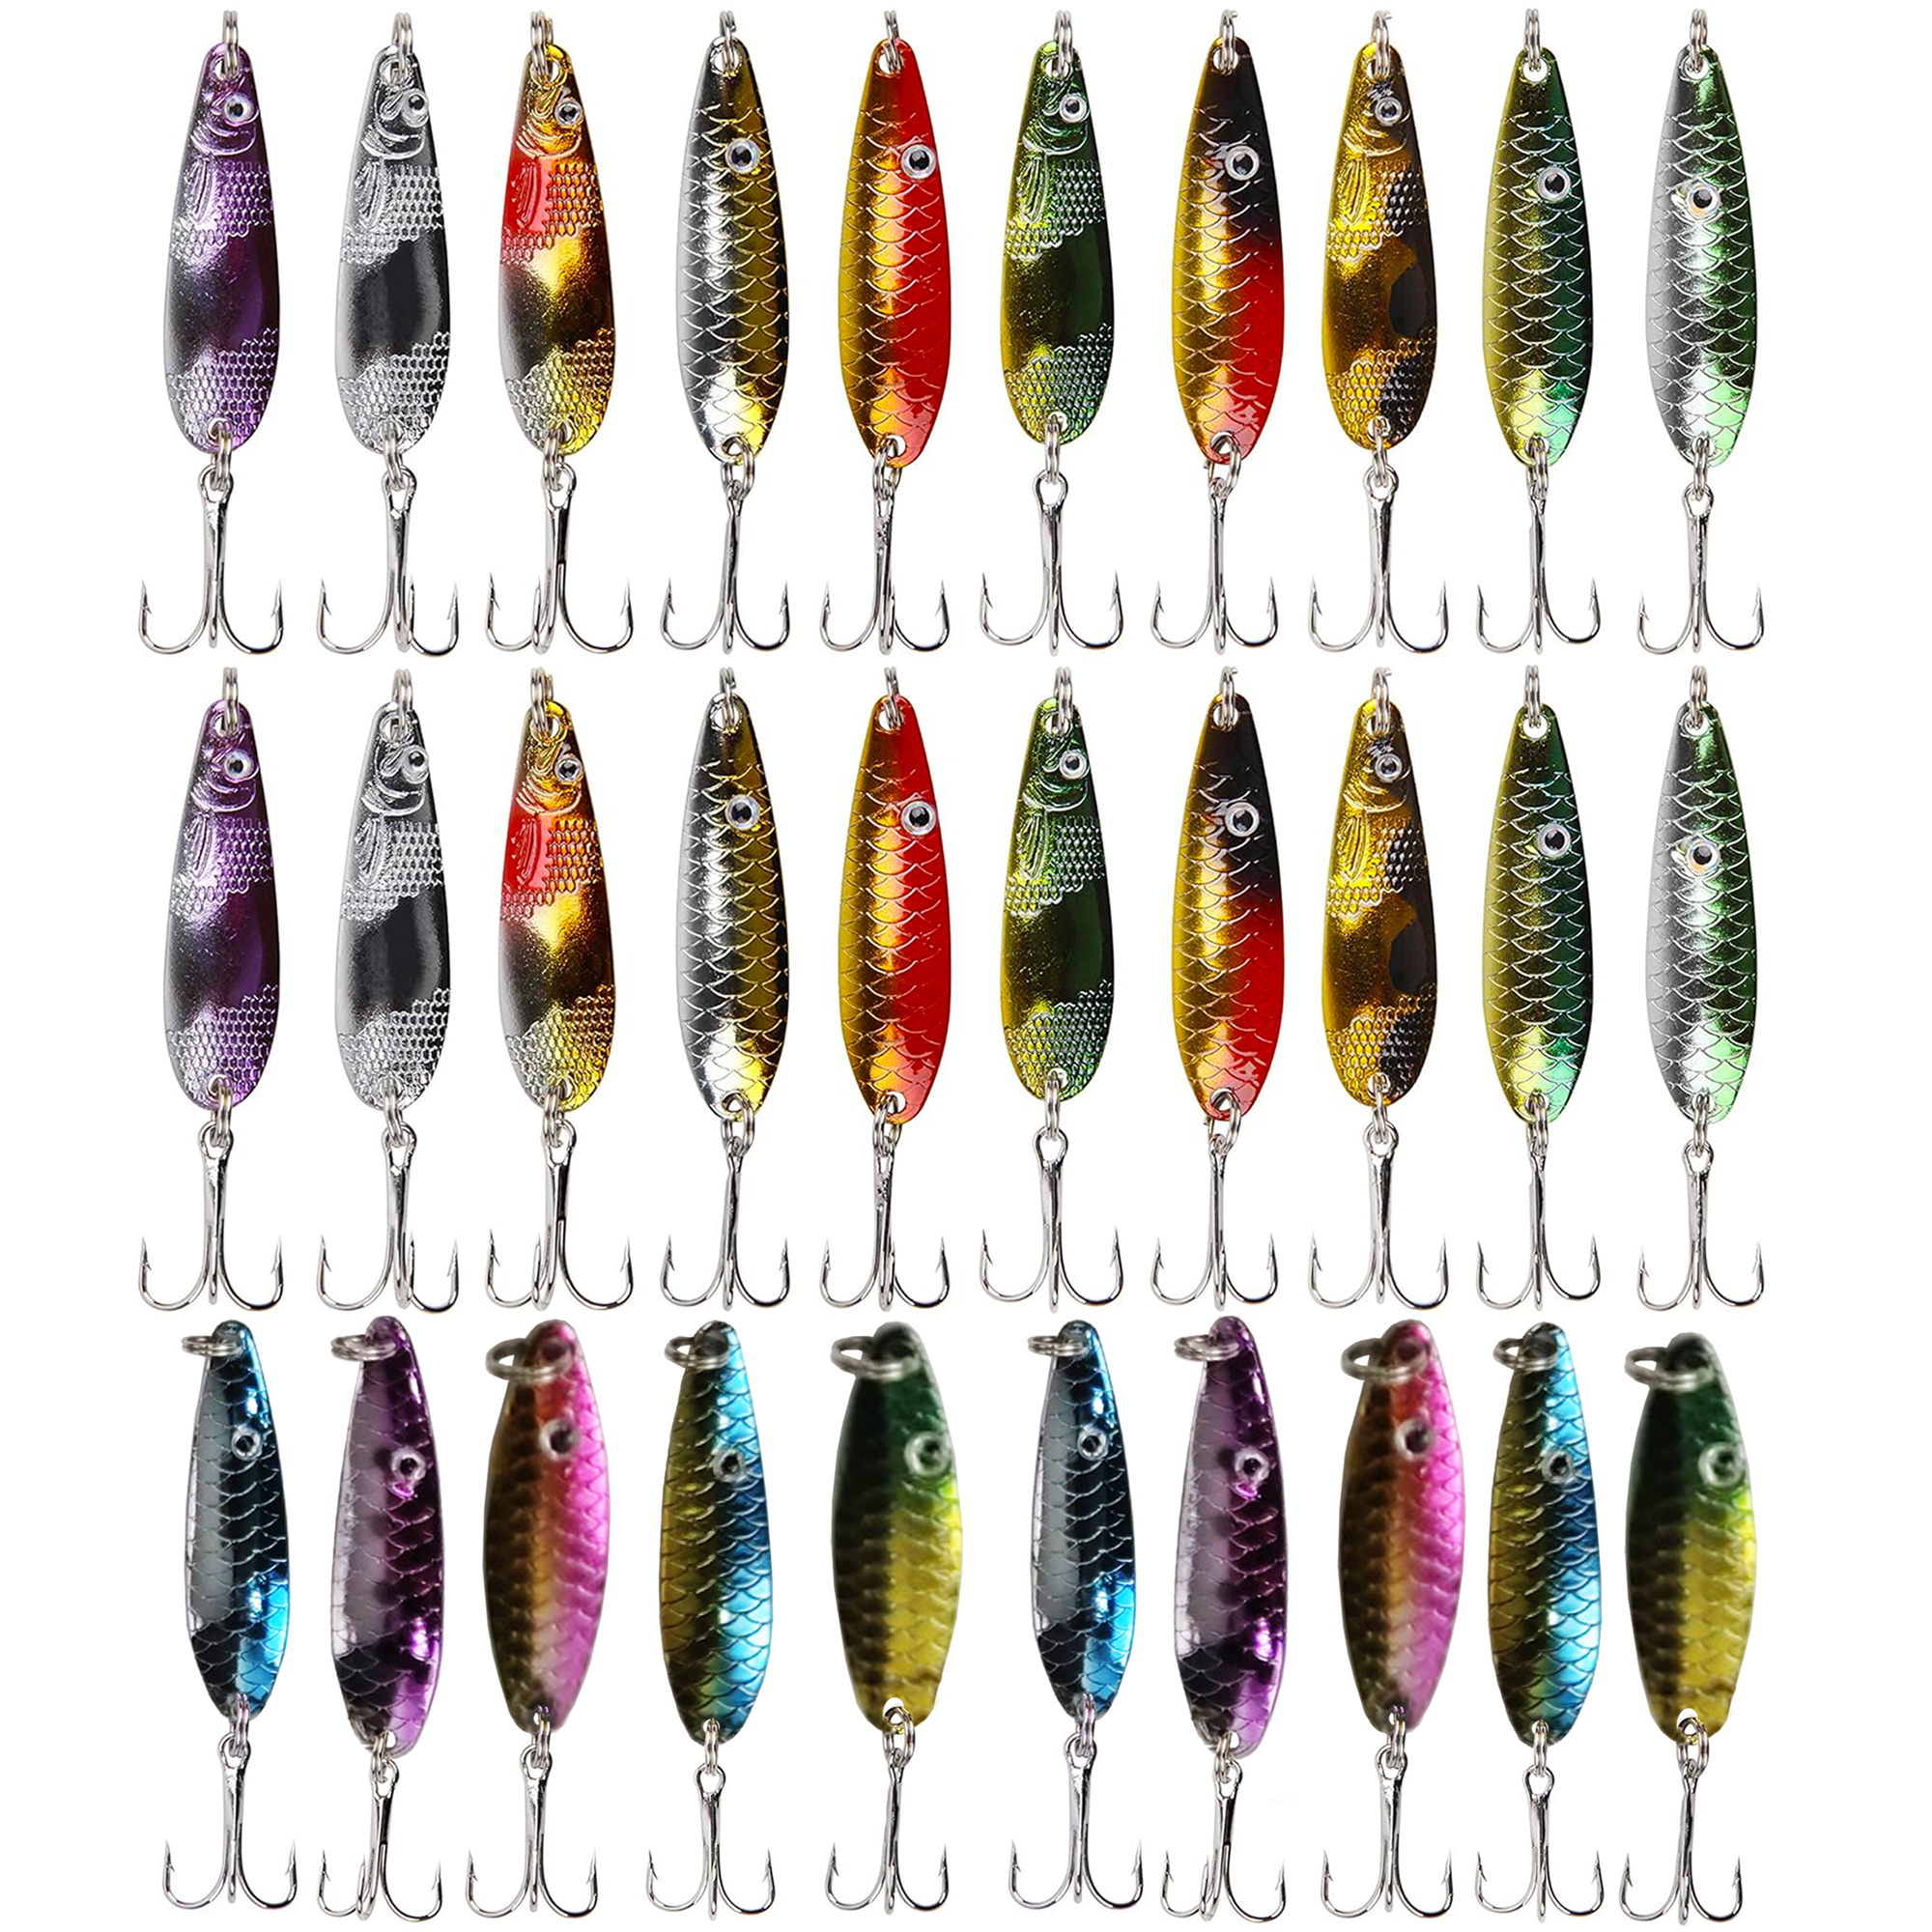 FREE FISHER 30pcs/Set Fishing Spoon Lures Metal Spinner Sequins Fishing Spinnerbaits Artificial Iron Fish Baits for Bass/Pike/Trout/Salmon Pesca